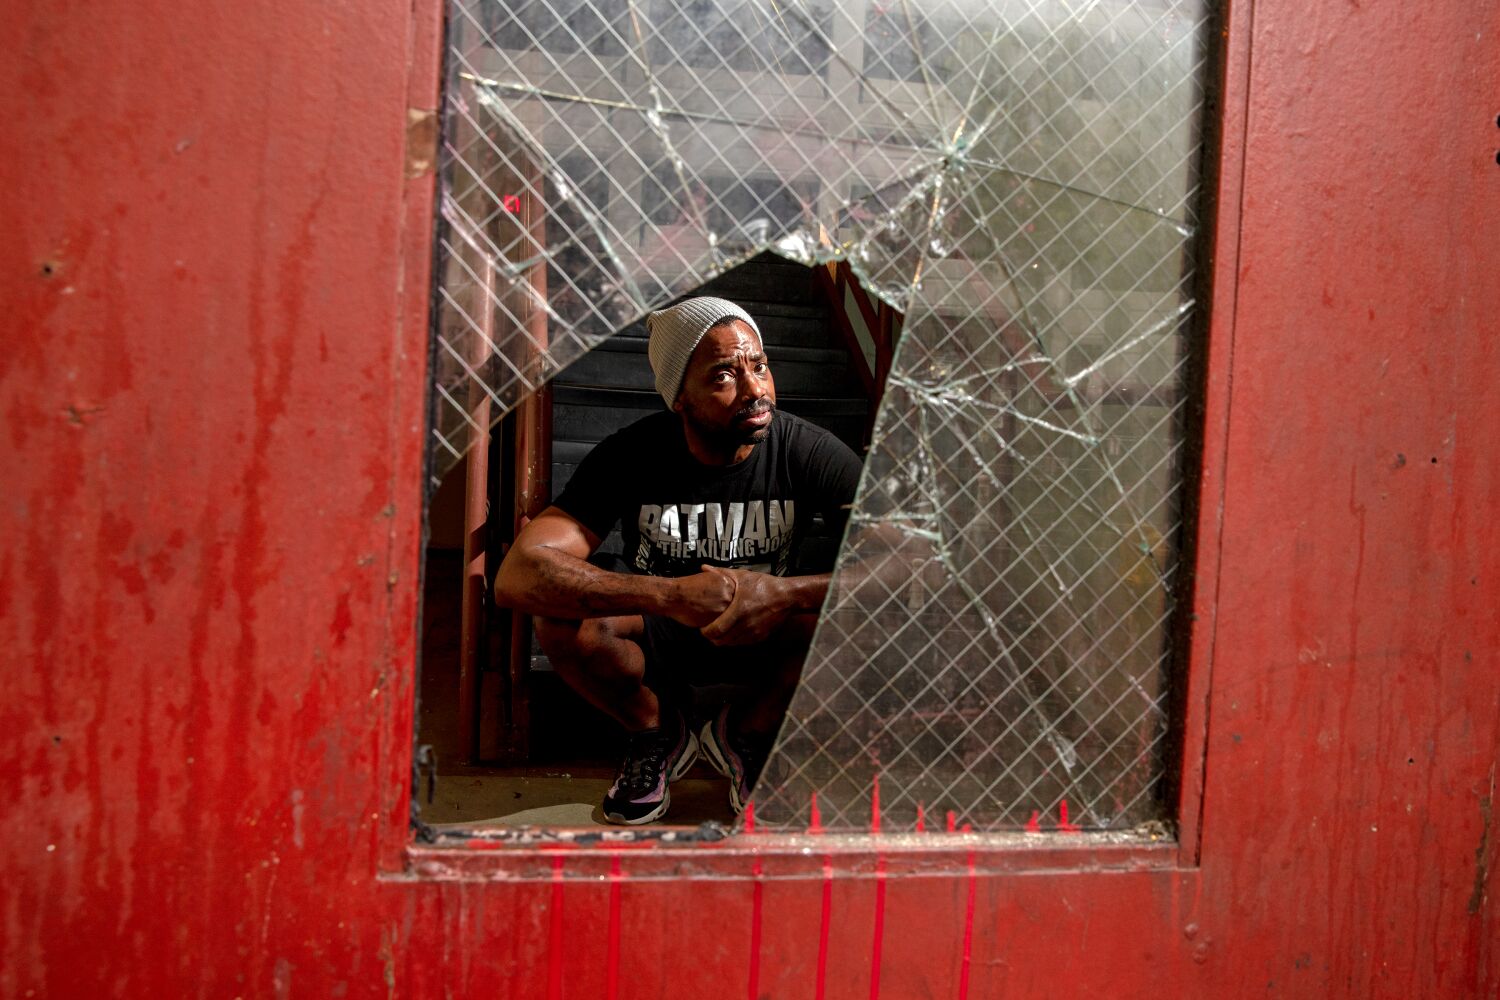 Bad bets, dysfunction: Inside the collapse of the Skid Row Housing Trust